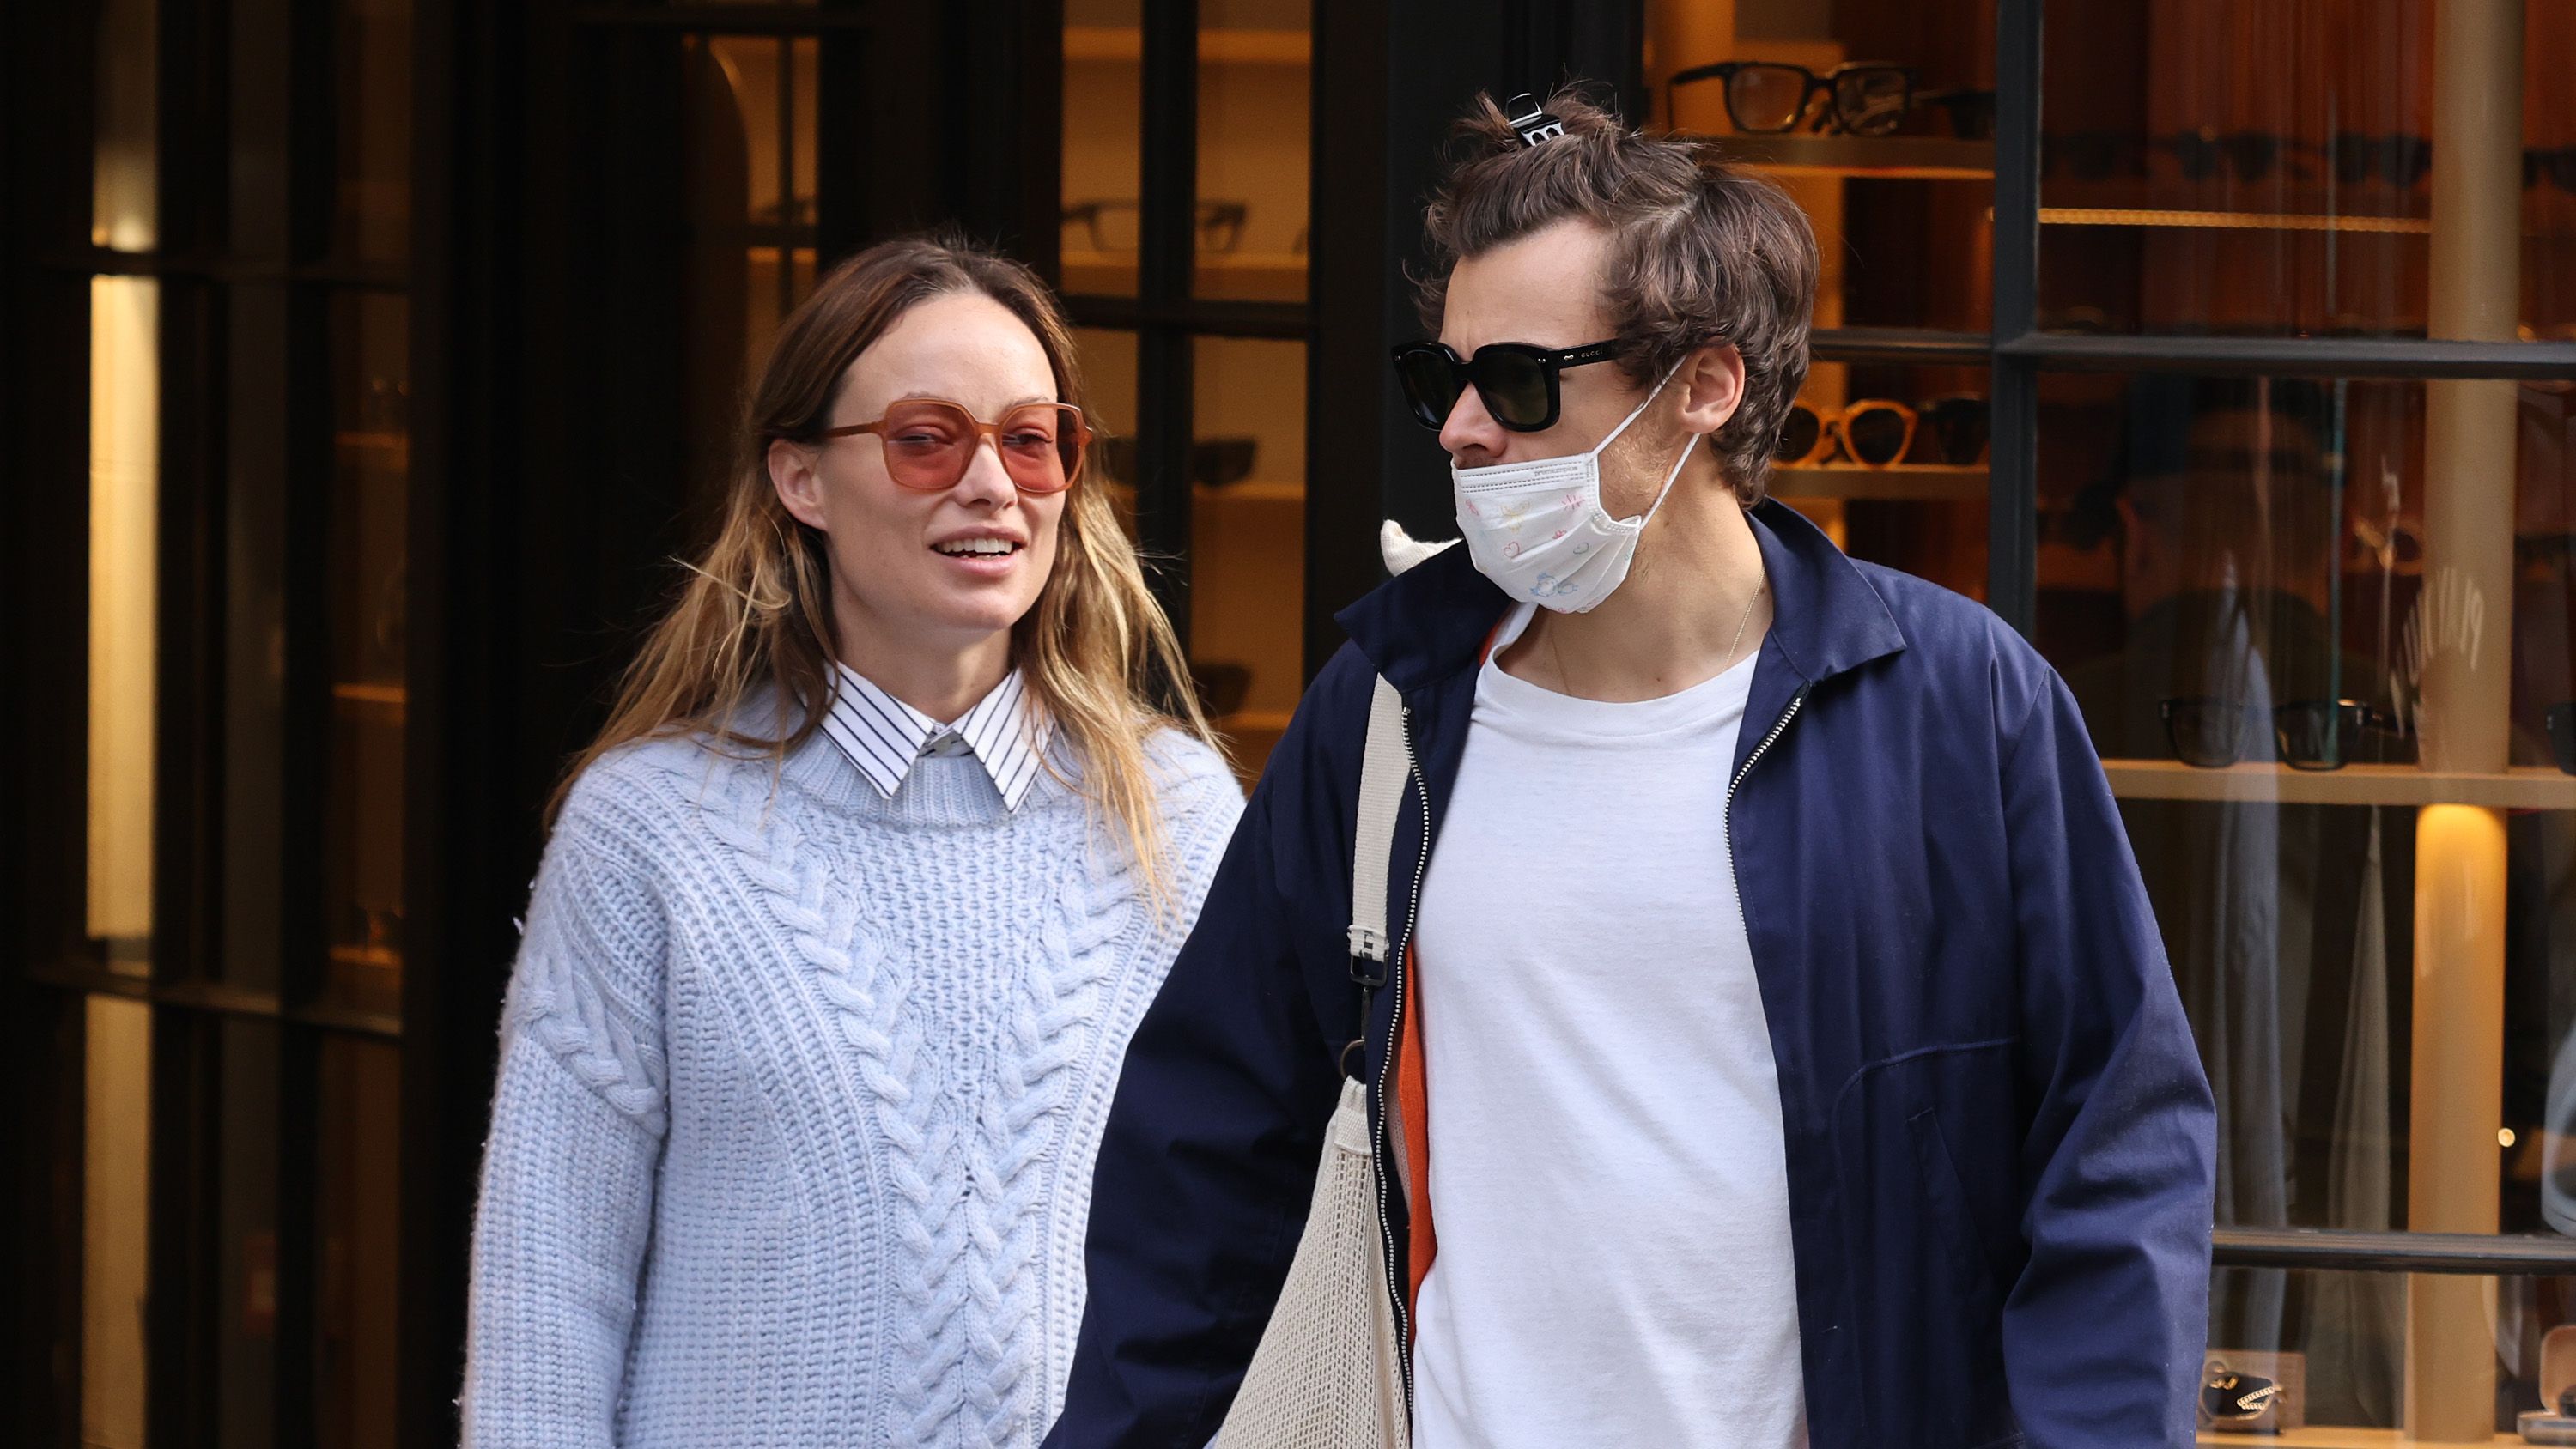 Harry Styles and Olivia Wilde Have Remained Good Friends After